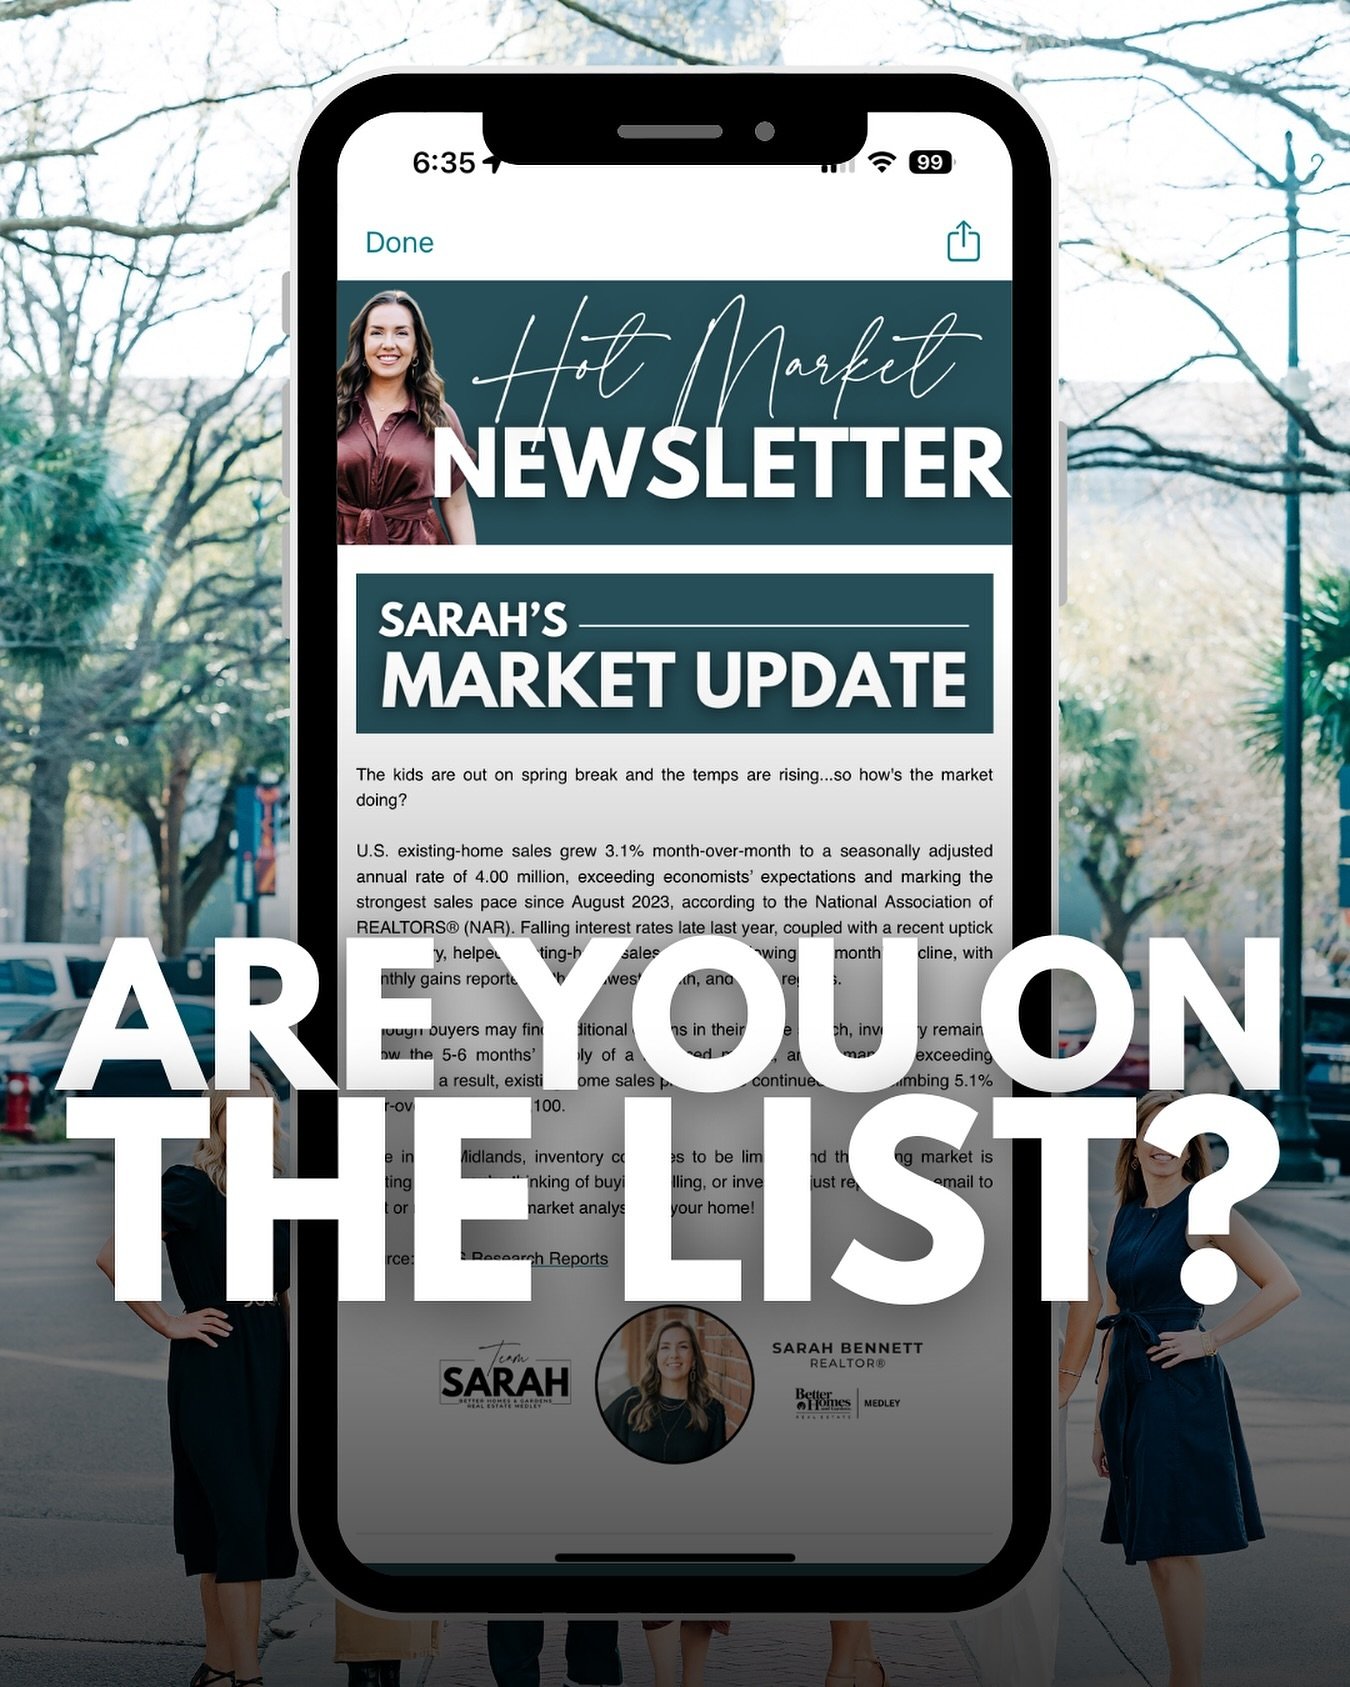 Are you on the list? 📋 Once per month, I send out my Hot Market Newsletter to everyone on my email list. This keeps my database up to date on👇🏻

📈 Market Trends
🗣️ Real Estate Tips
🍴New Spots Around Columbia
🏡 My Listings 
🤣 Fun Videos
✨ And 